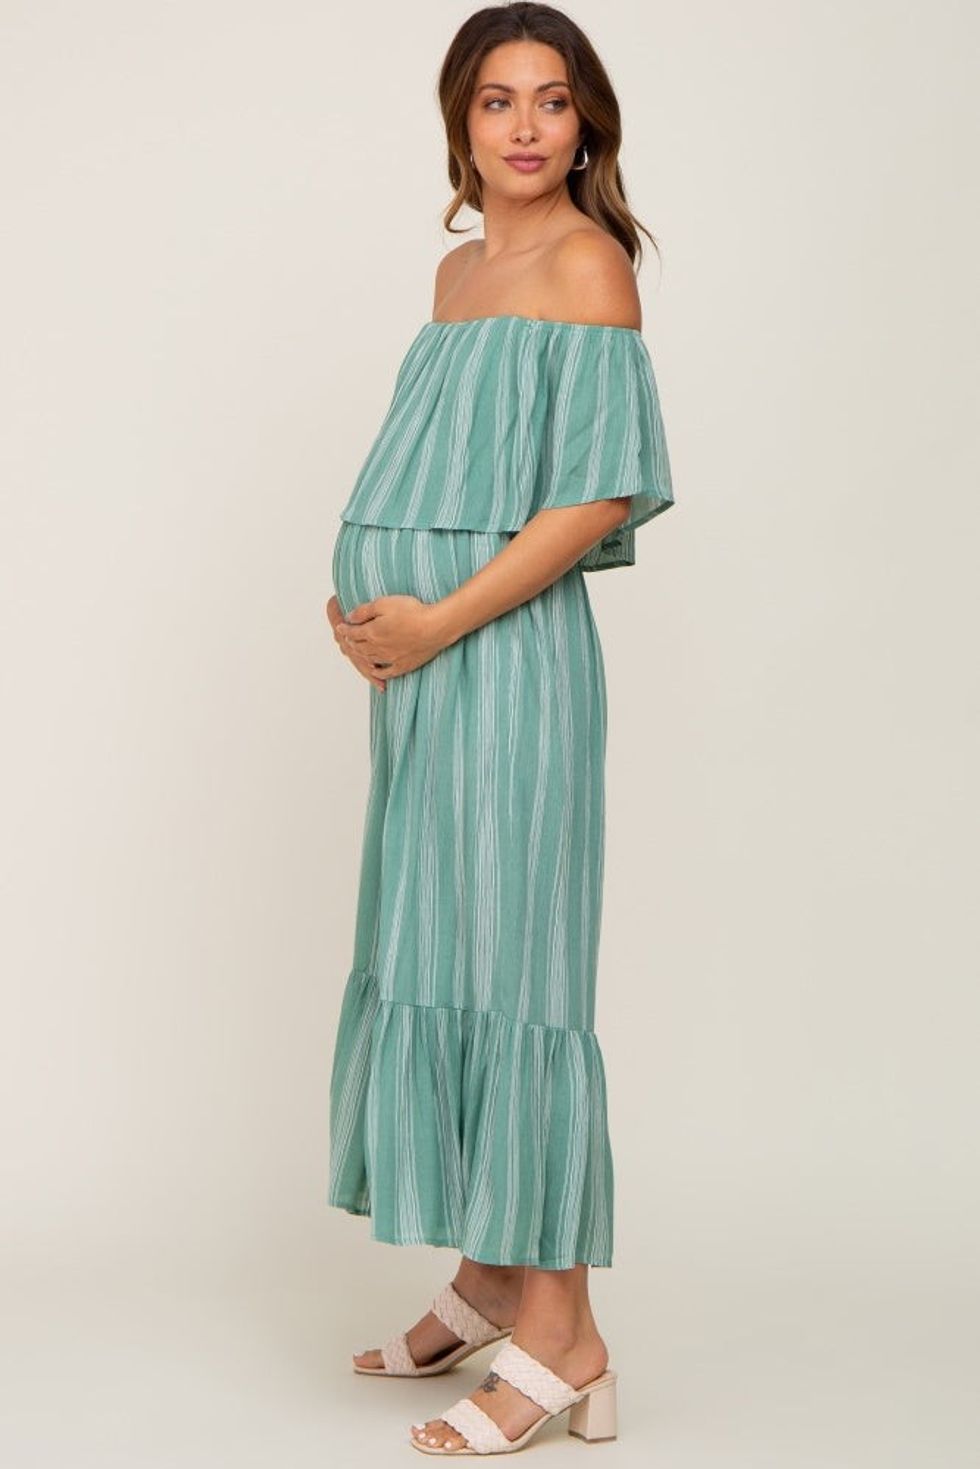 PinkBlush Green Striped Off Shoulder Maternity Jumpsuit stylish maternity clothes for summer